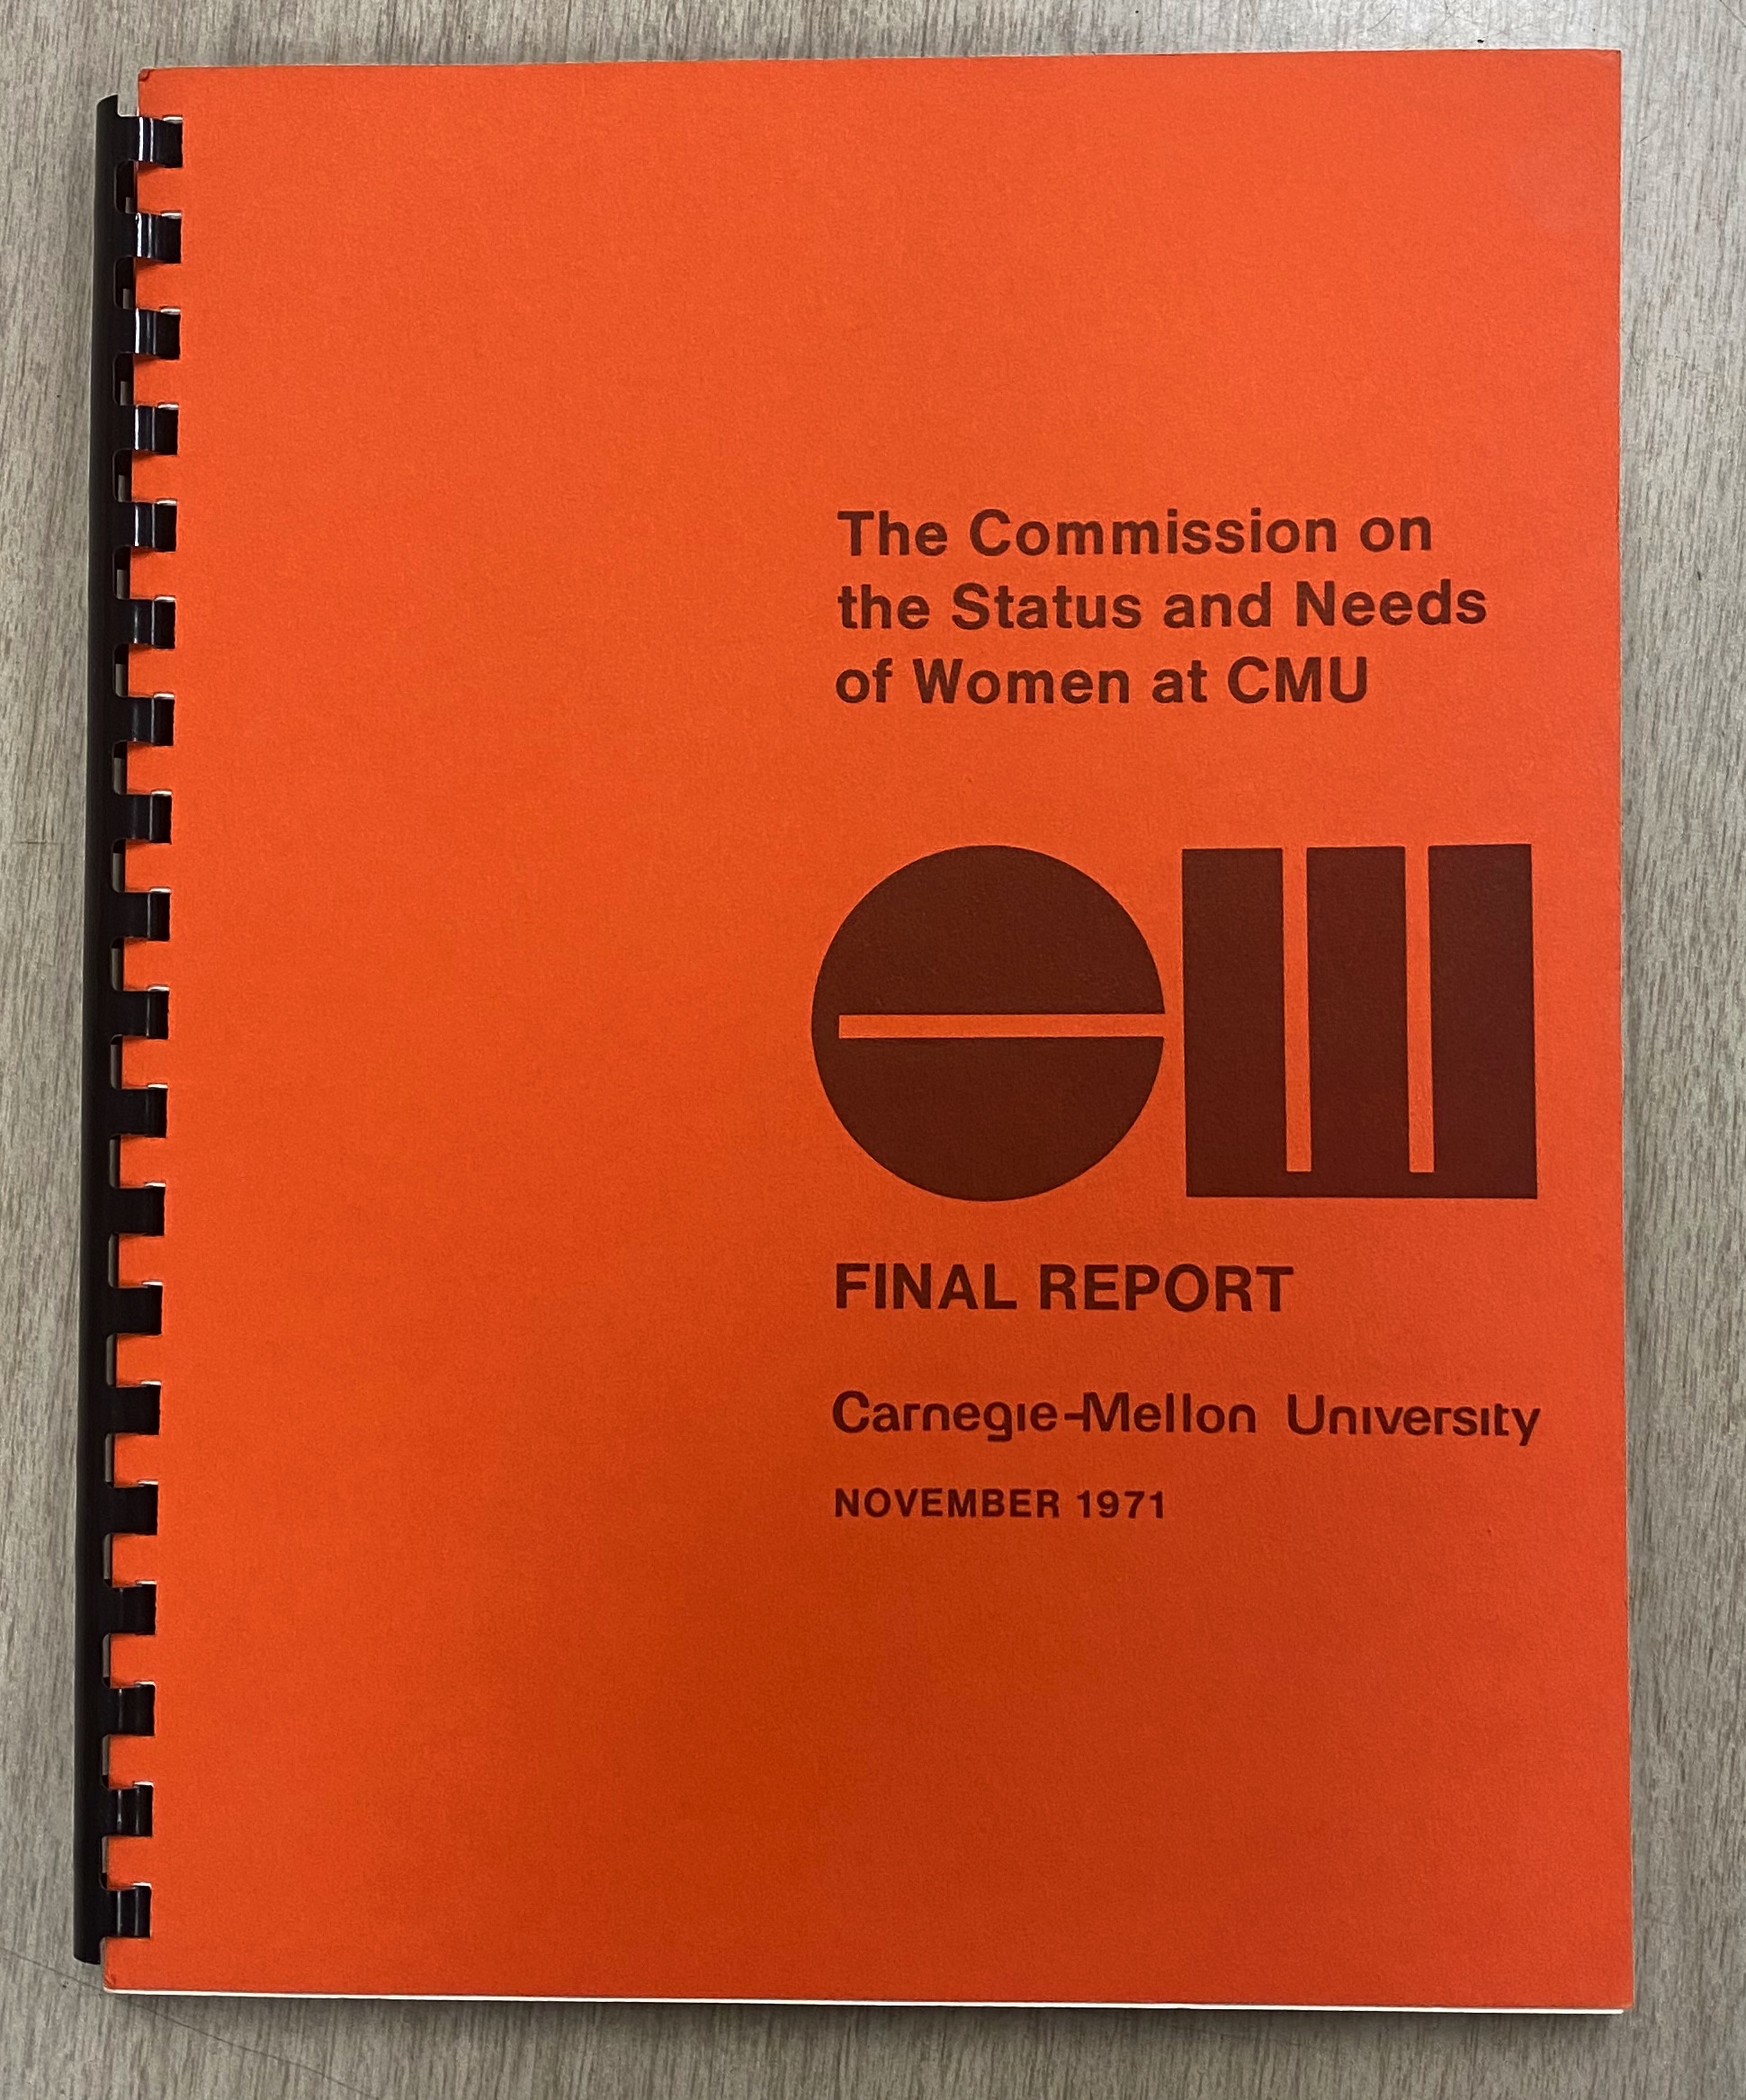 The Commission on the Status and Needs of Women at CMU (COSNW)